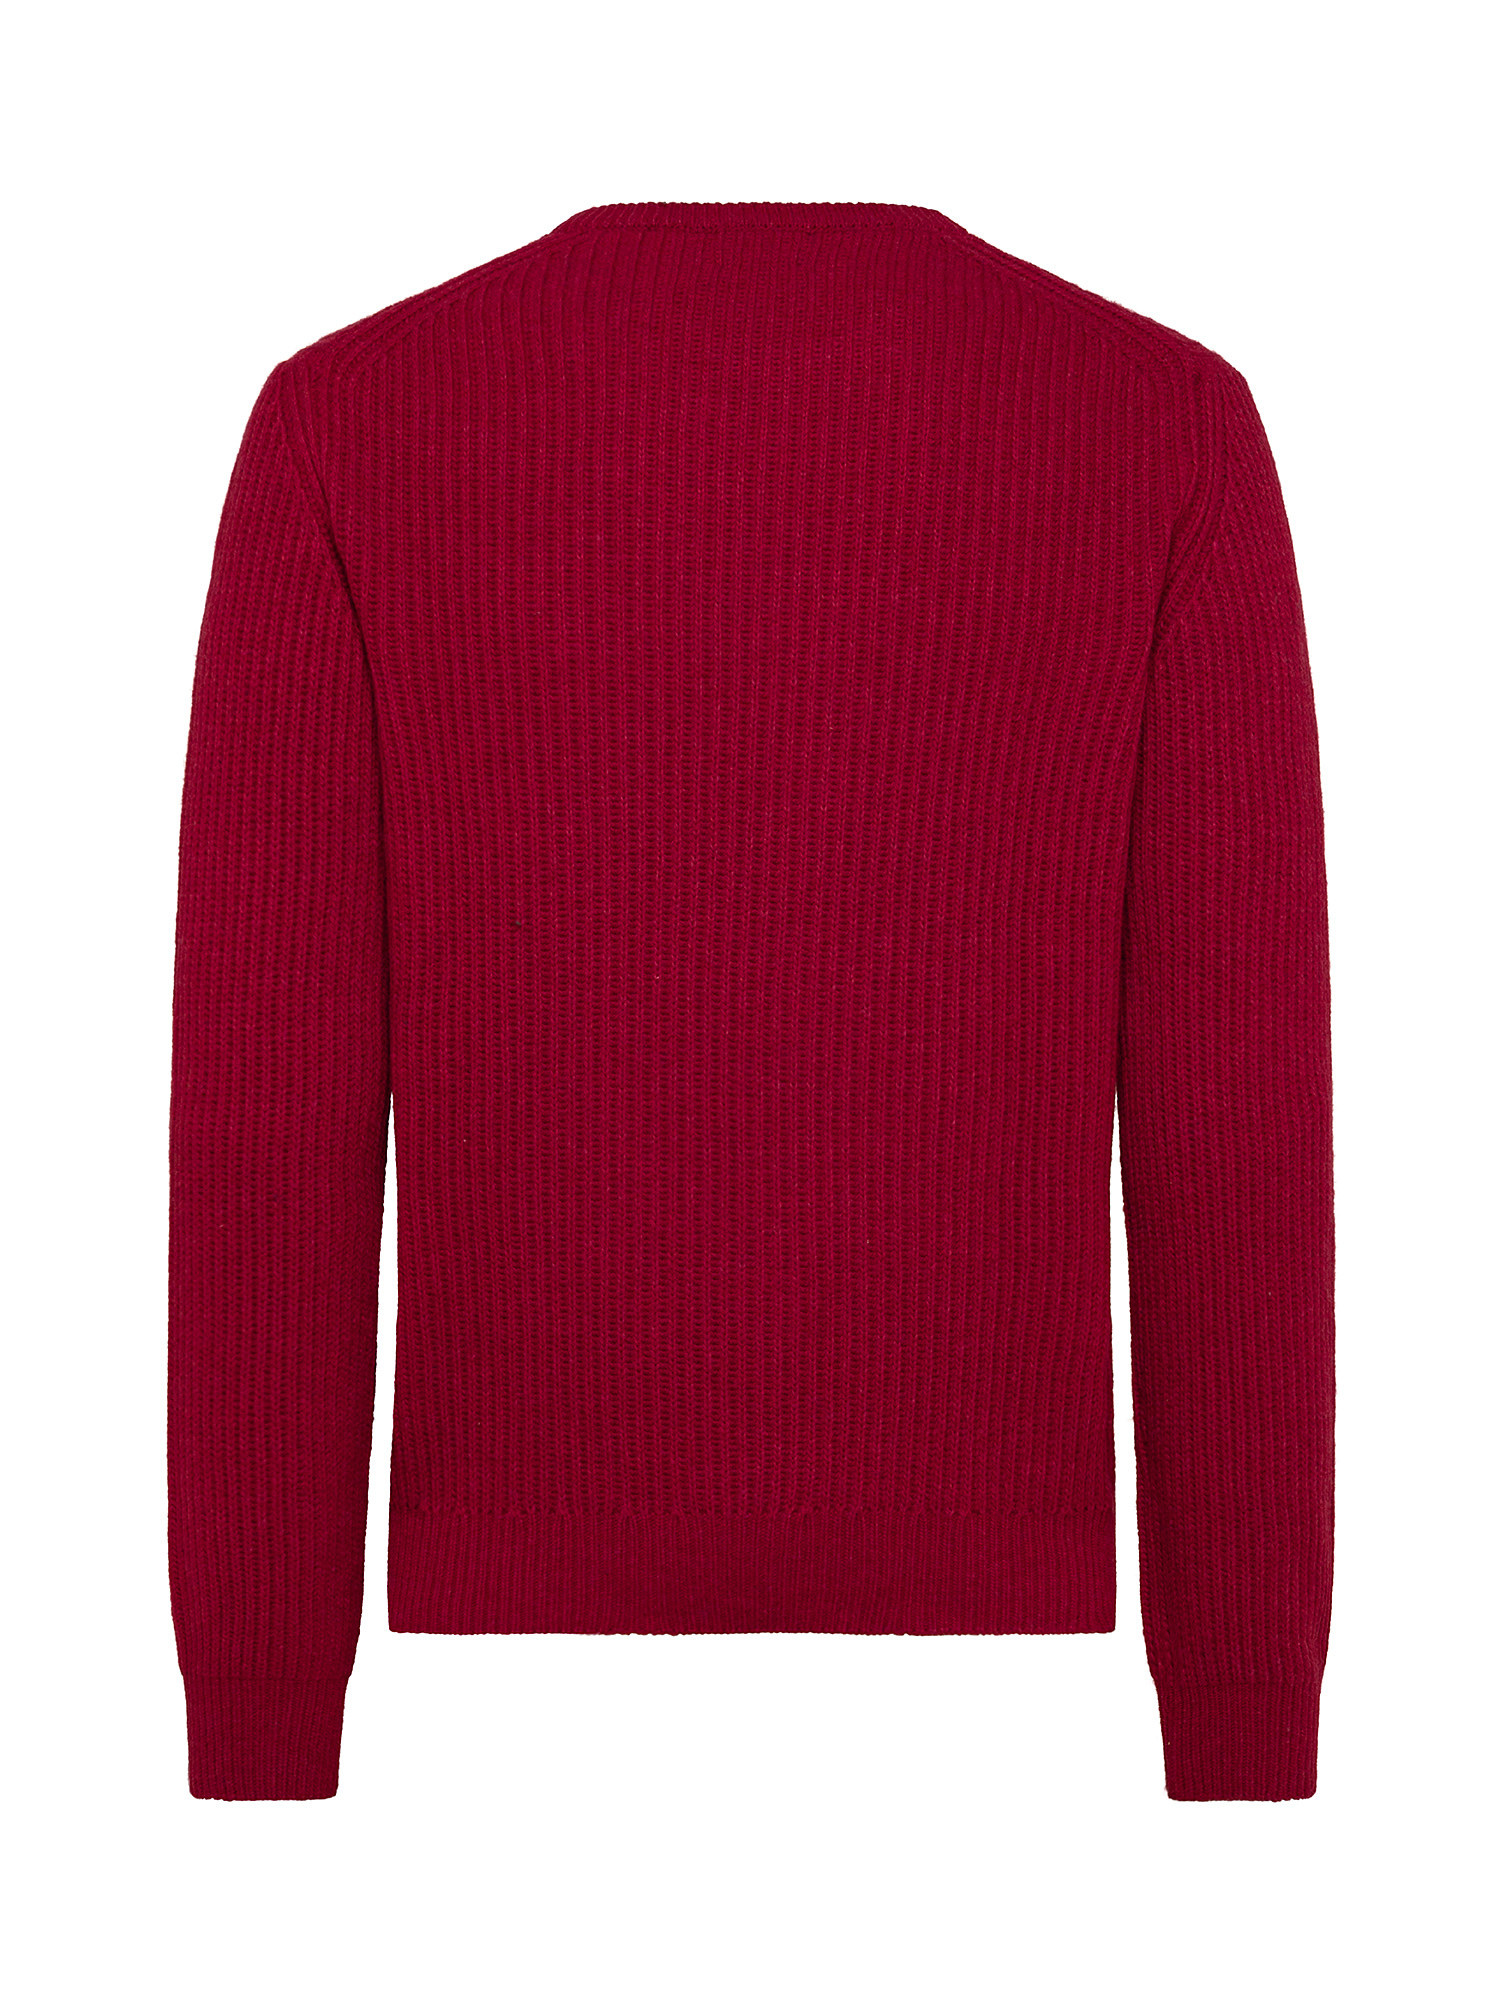 Crewneck sweater with noble fibers, Red, large image number 1